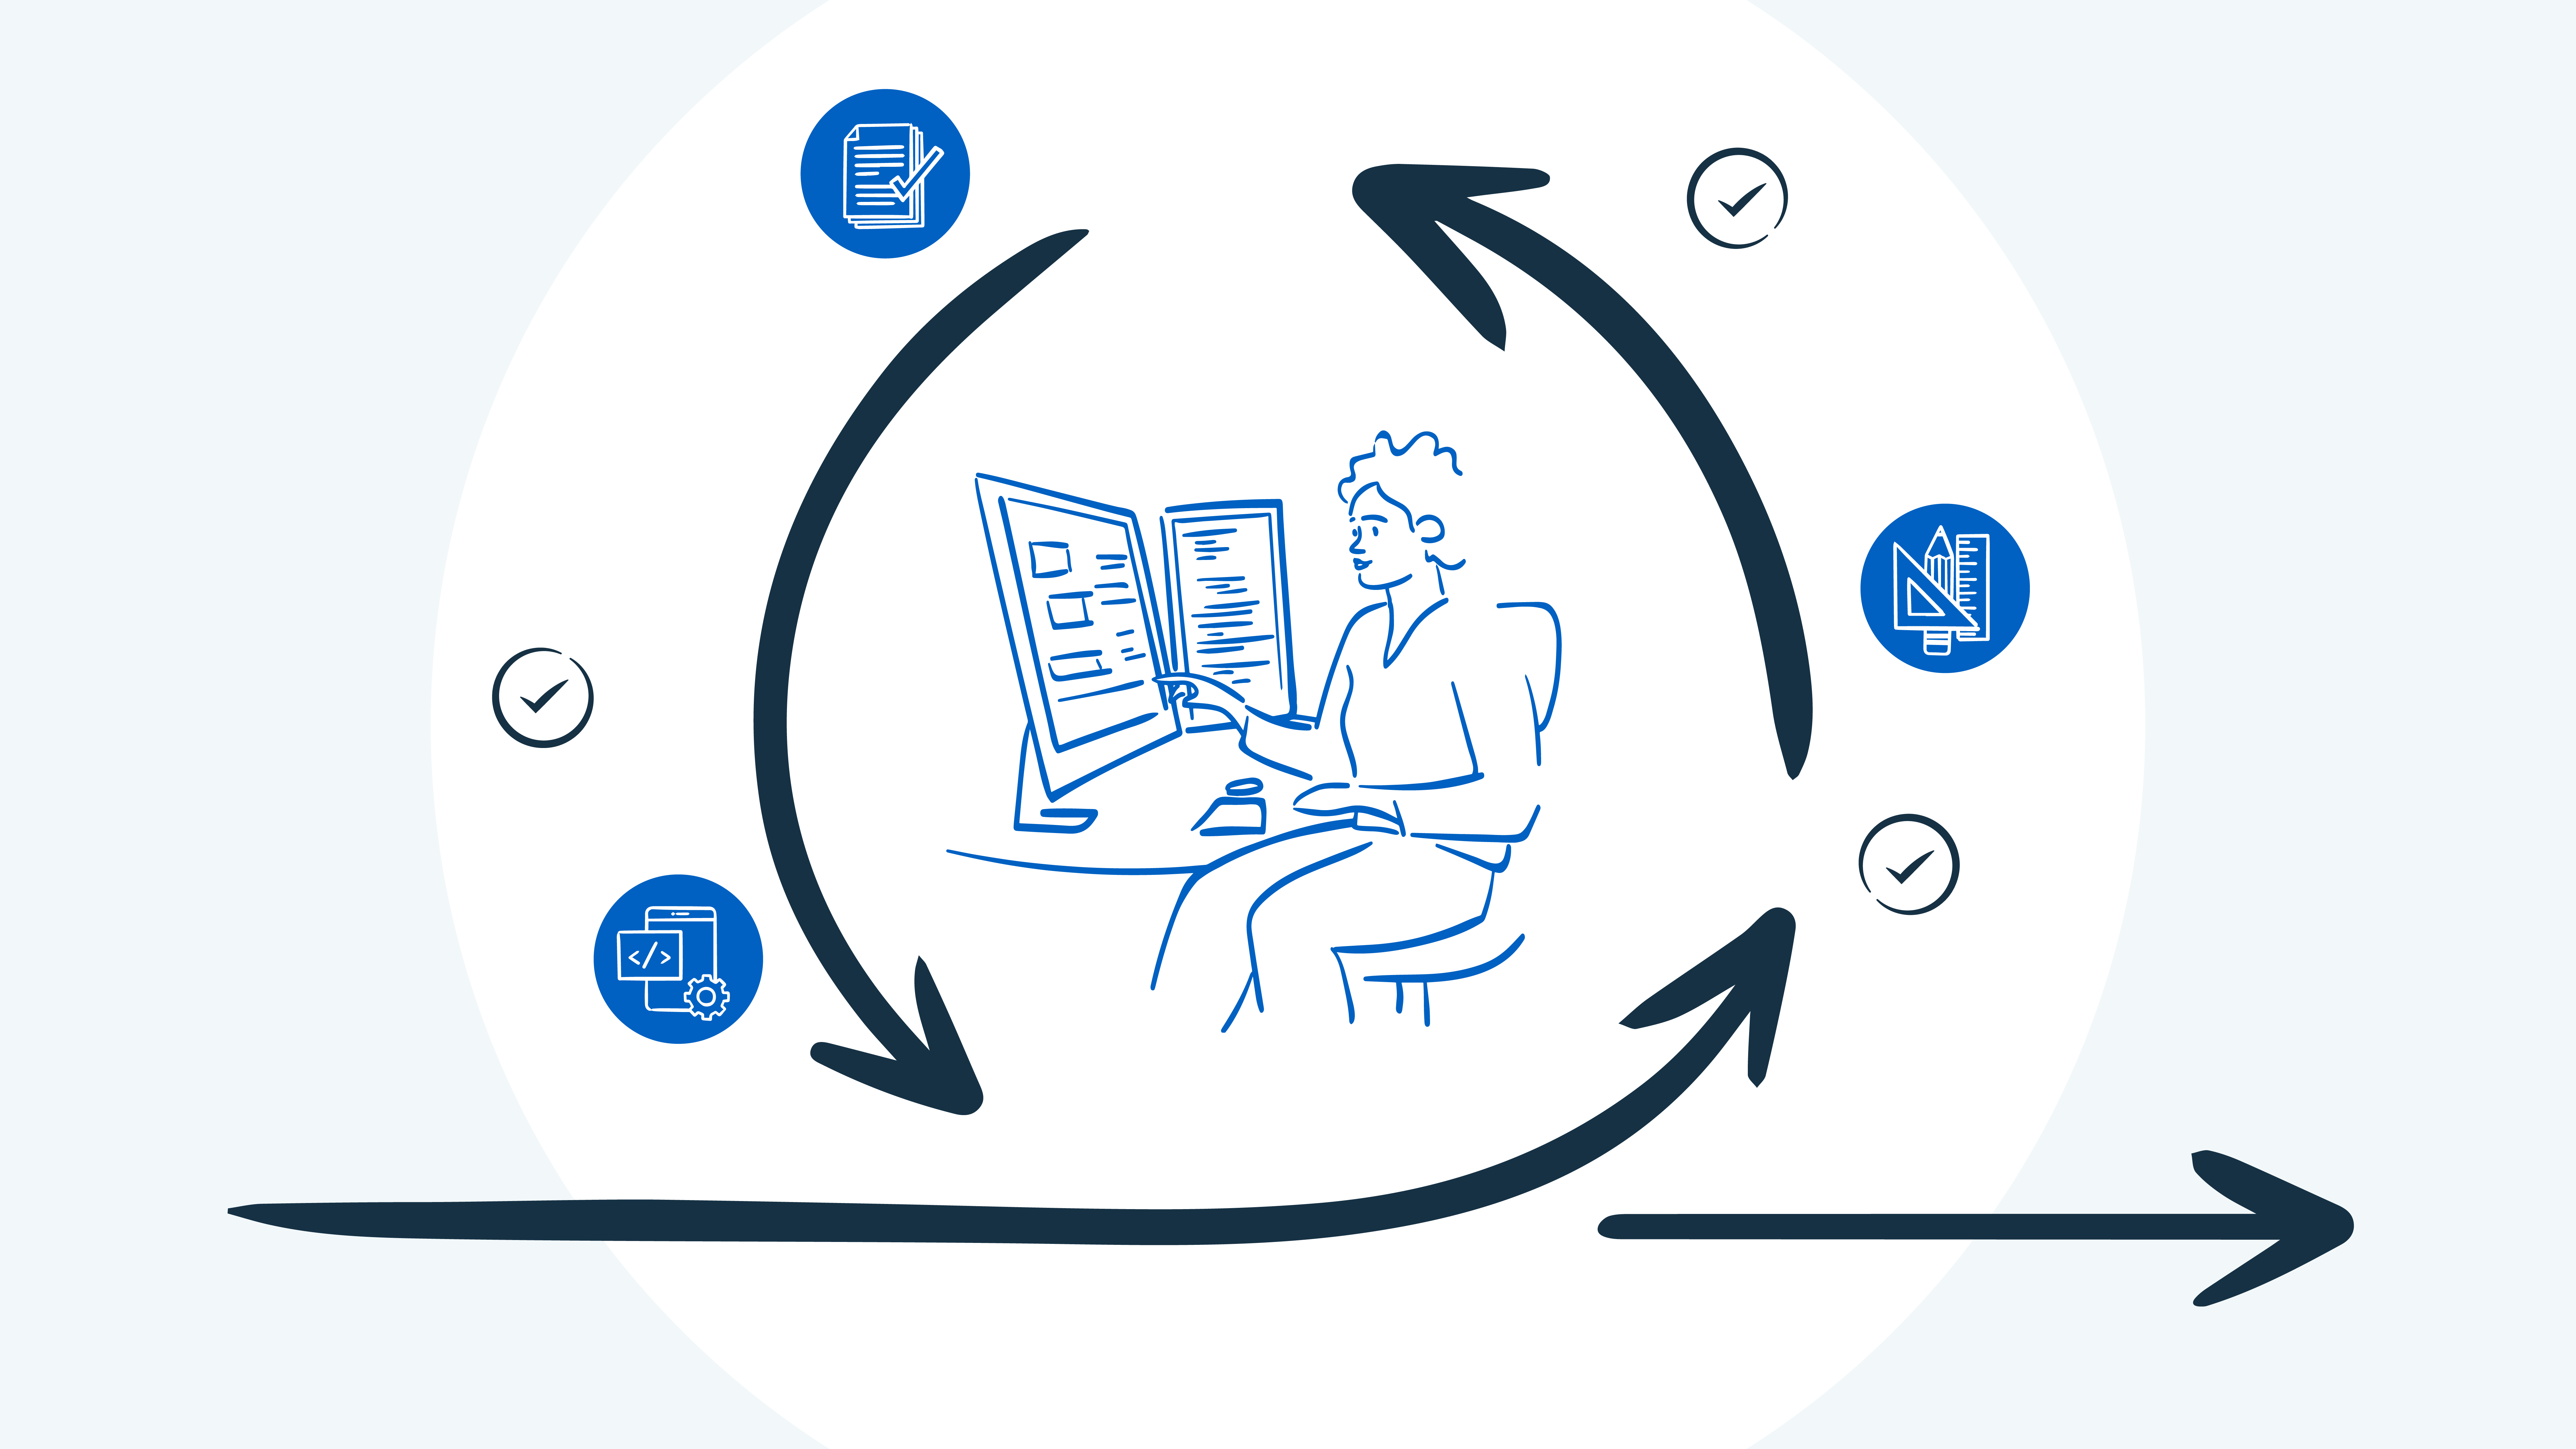 Illustration of a person working at a computer with an agile workflow arrow surrounding them